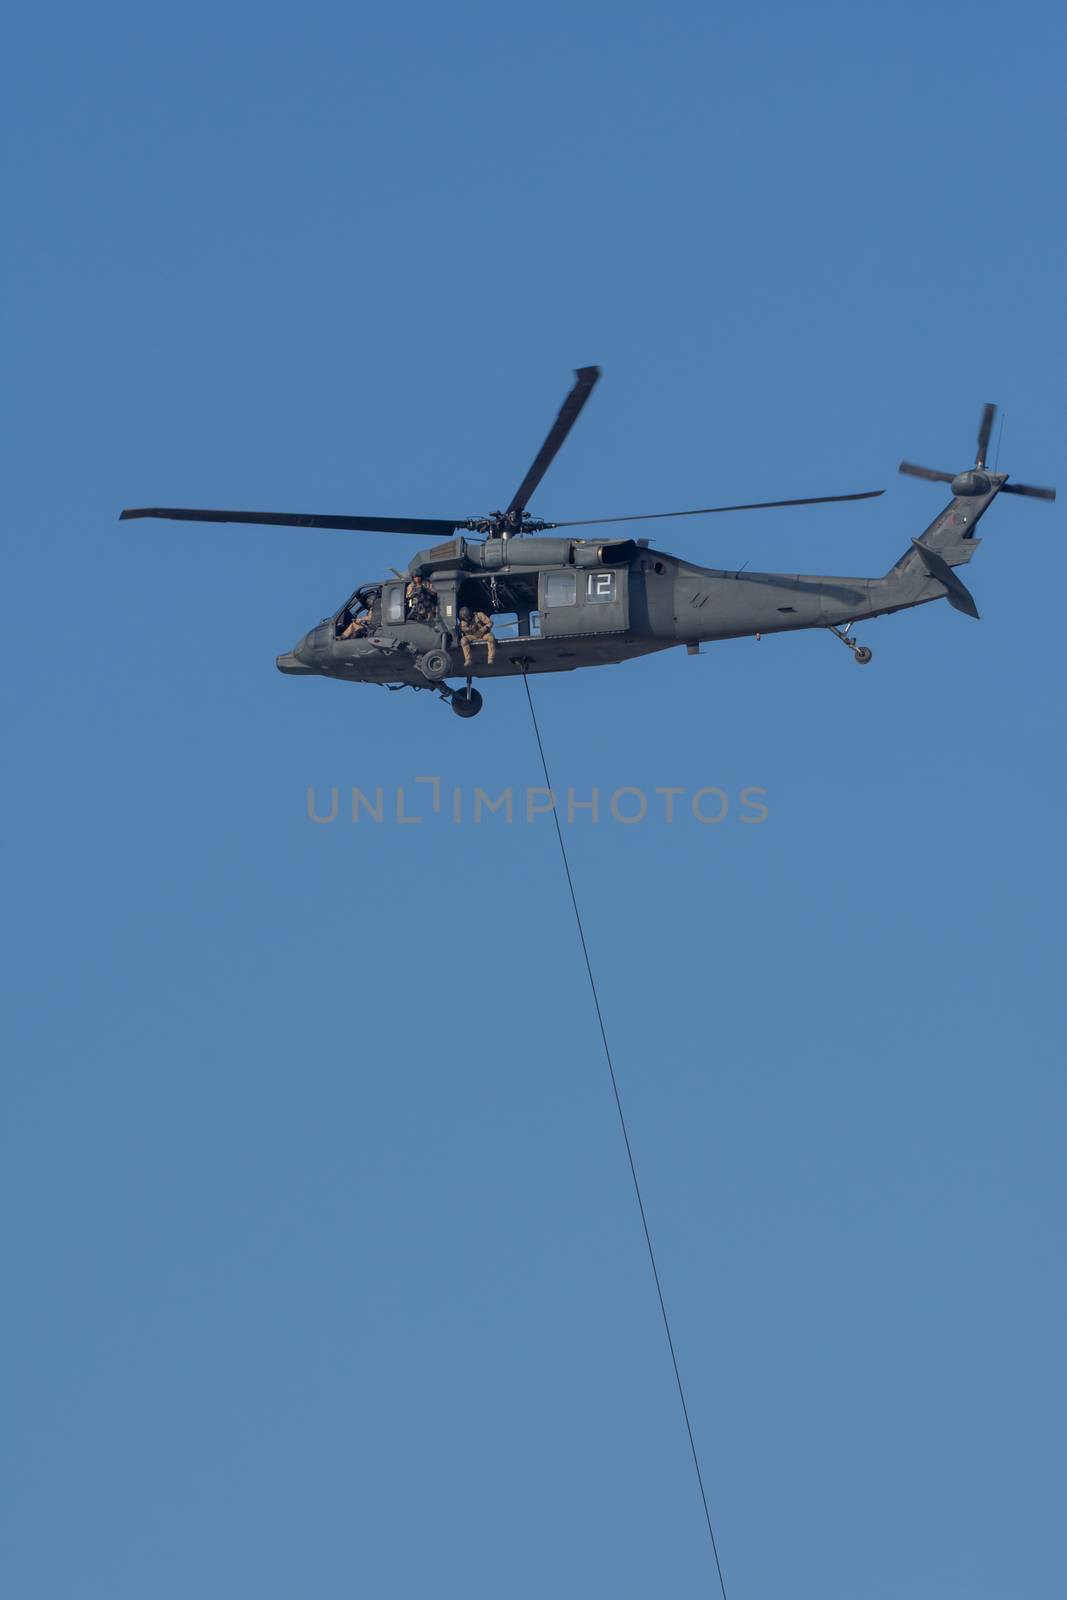 Military team in conflict resucing people by helicopter. droppin by kingmaphotos